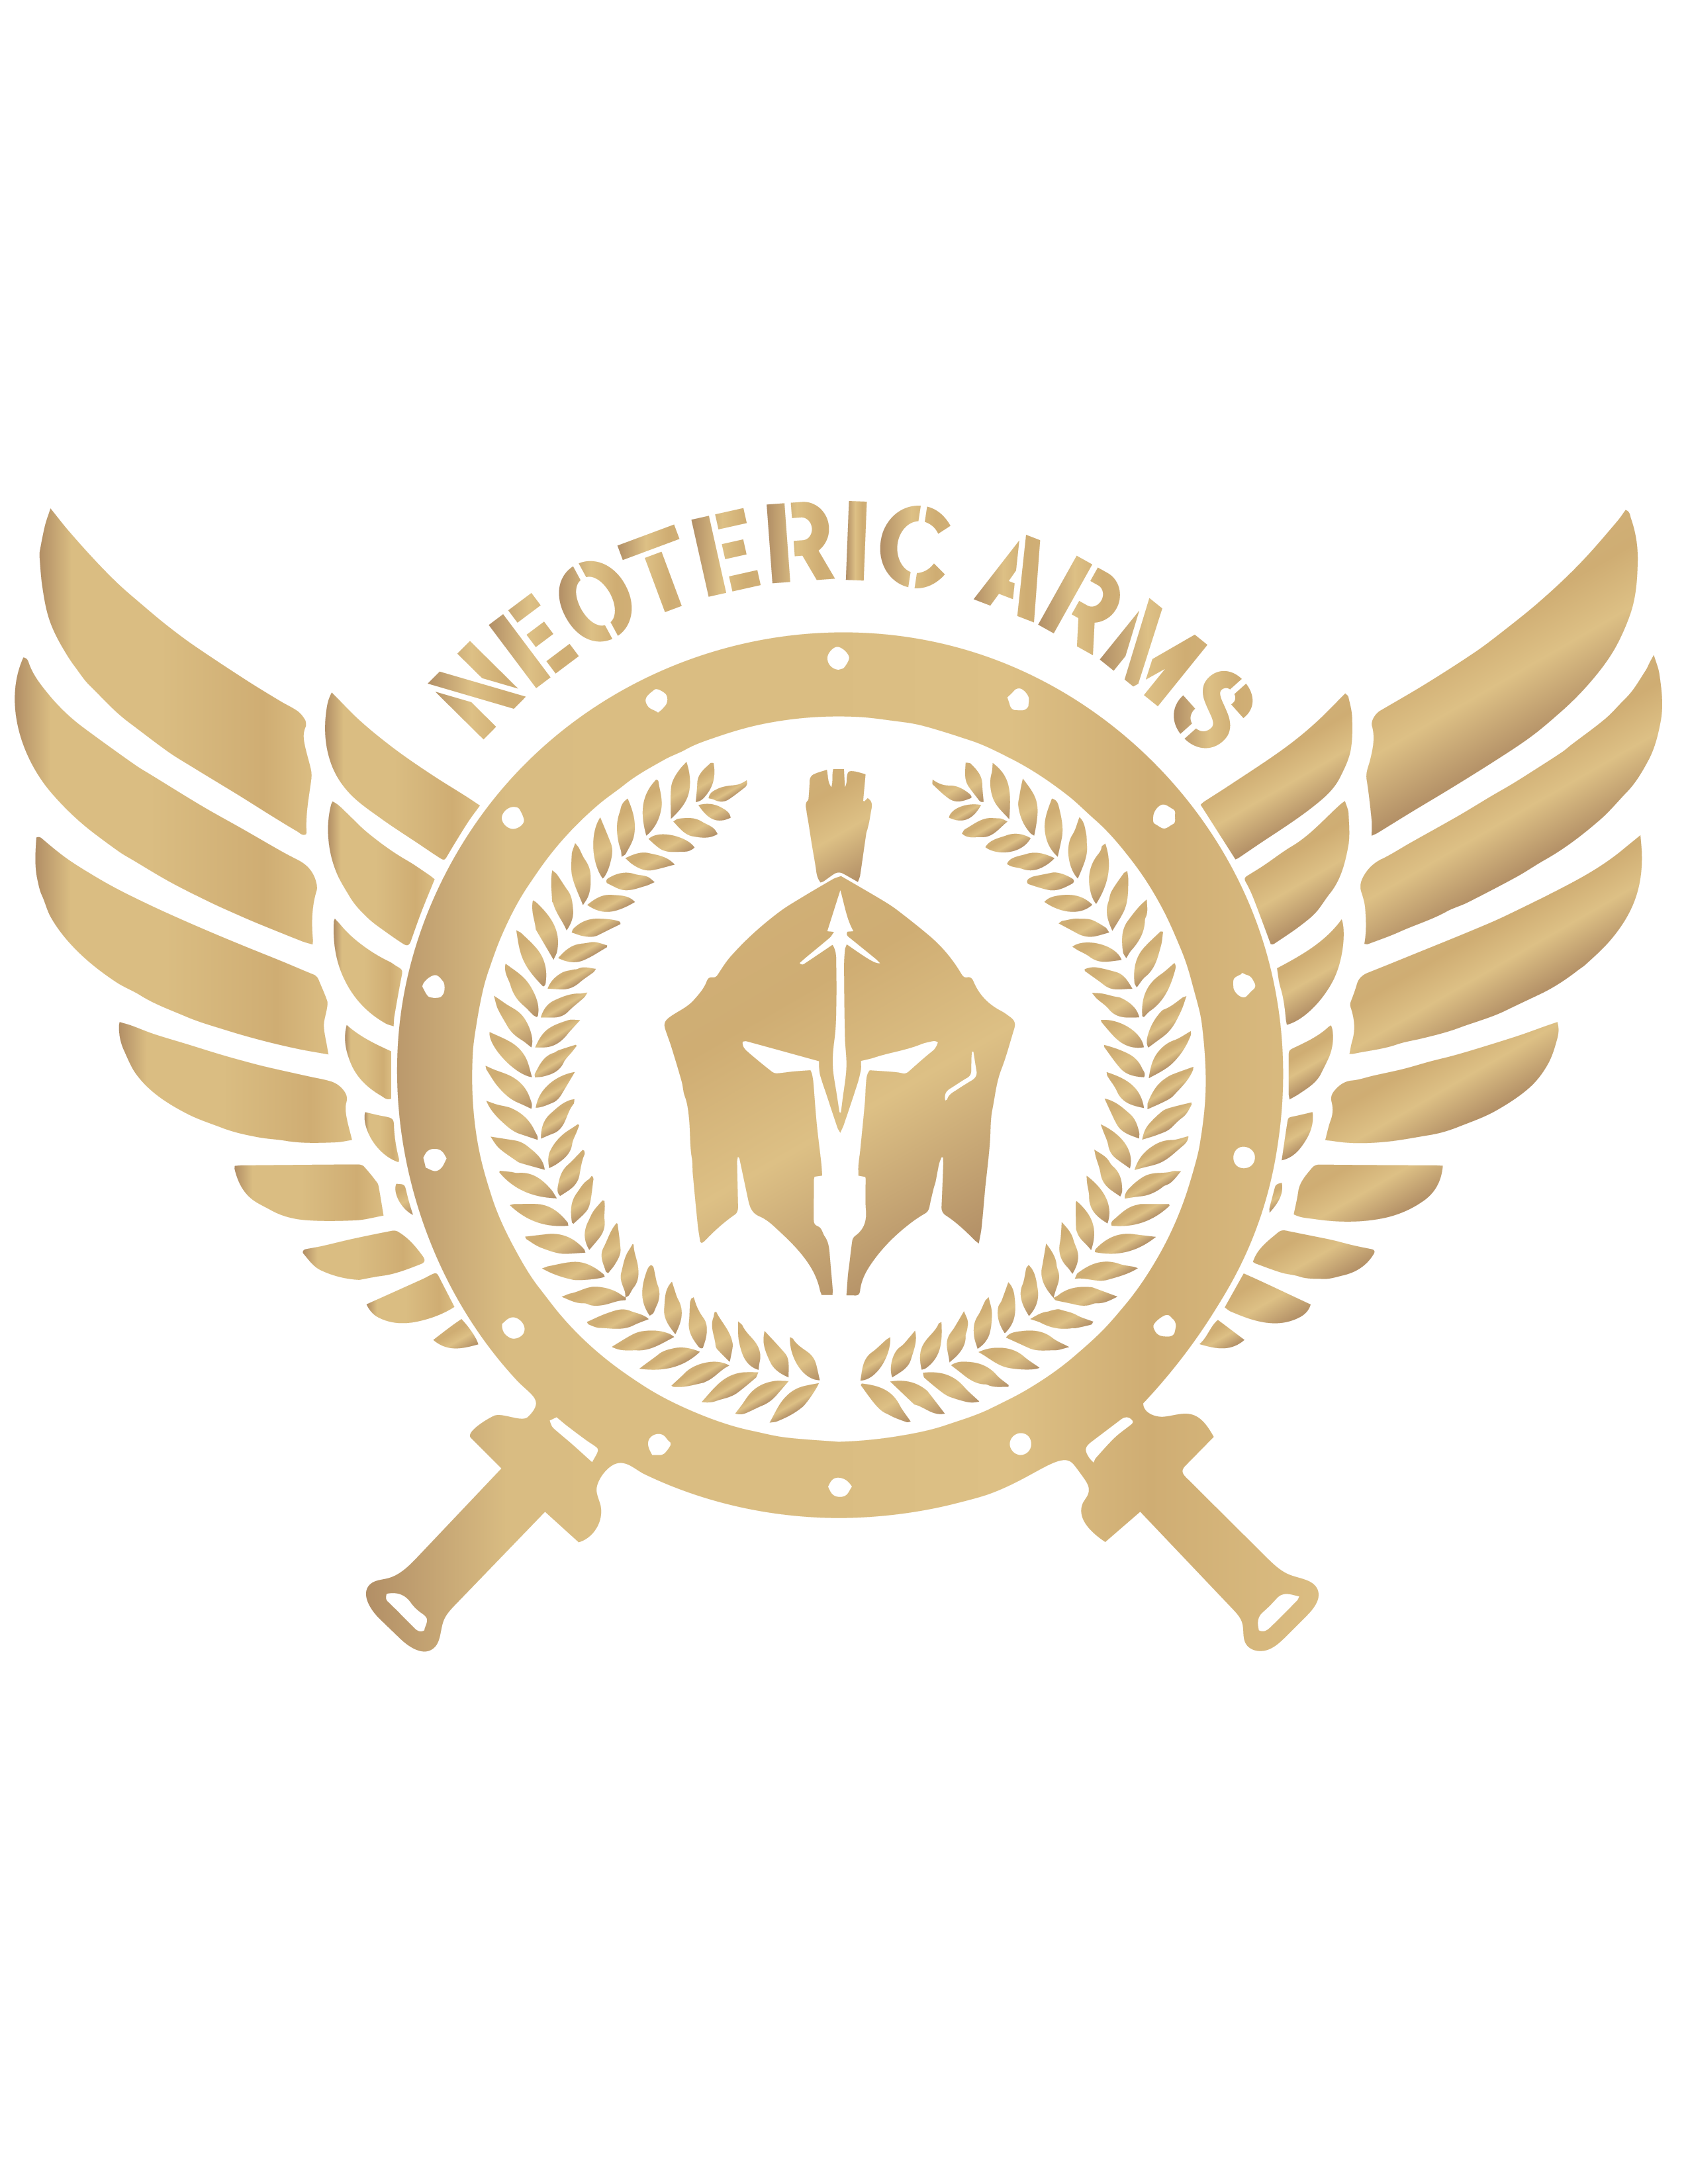 Neoteric Arms